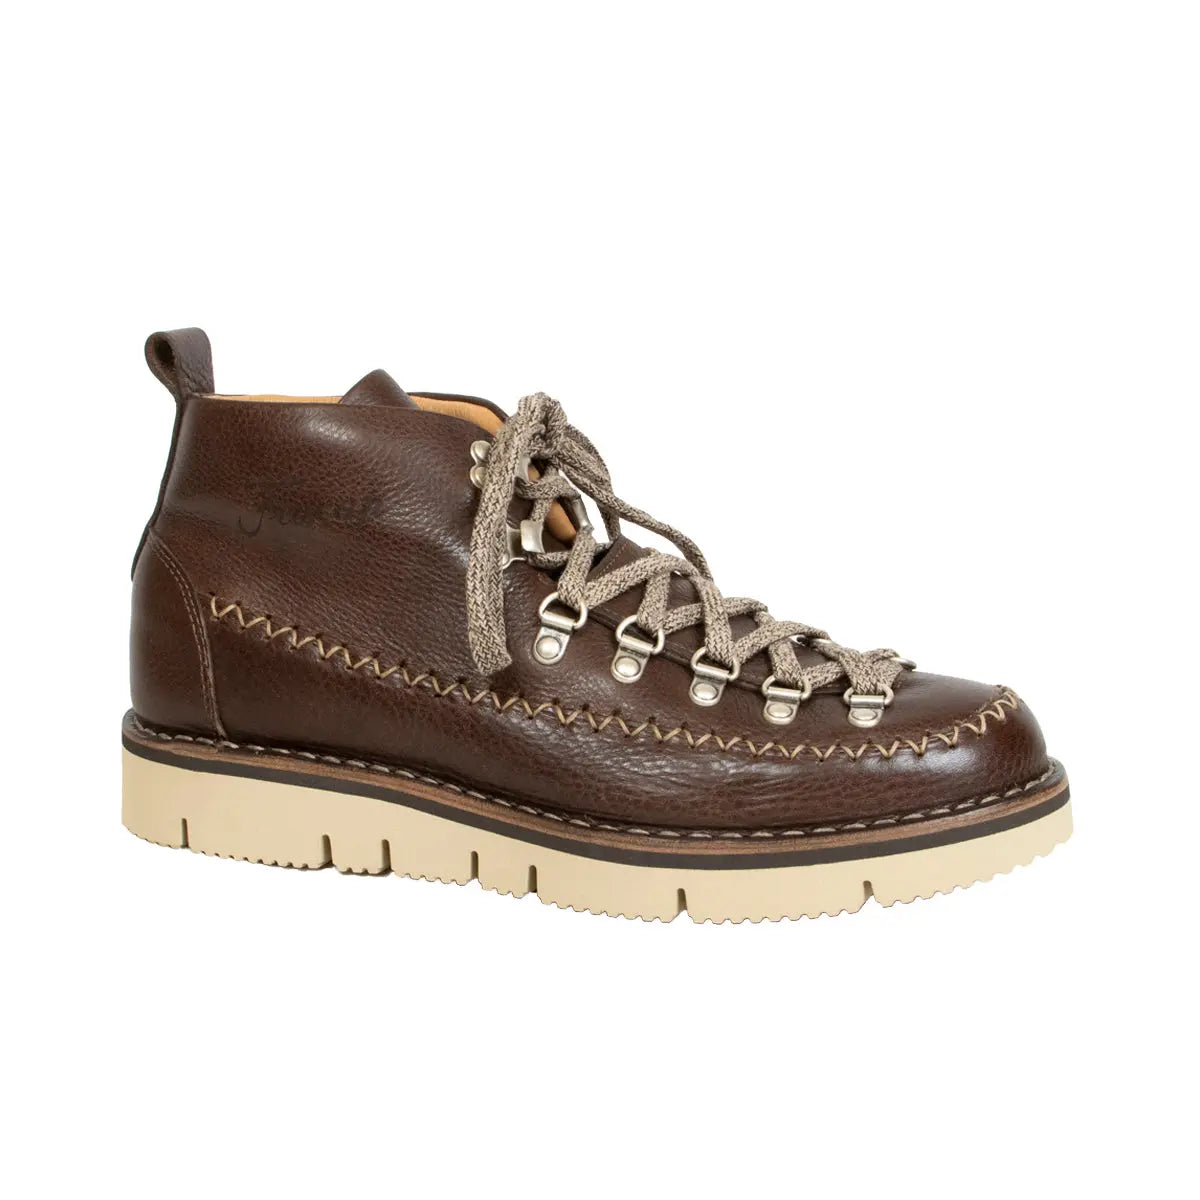 Brown Magnifico M120 Indian Boots  Fracap   